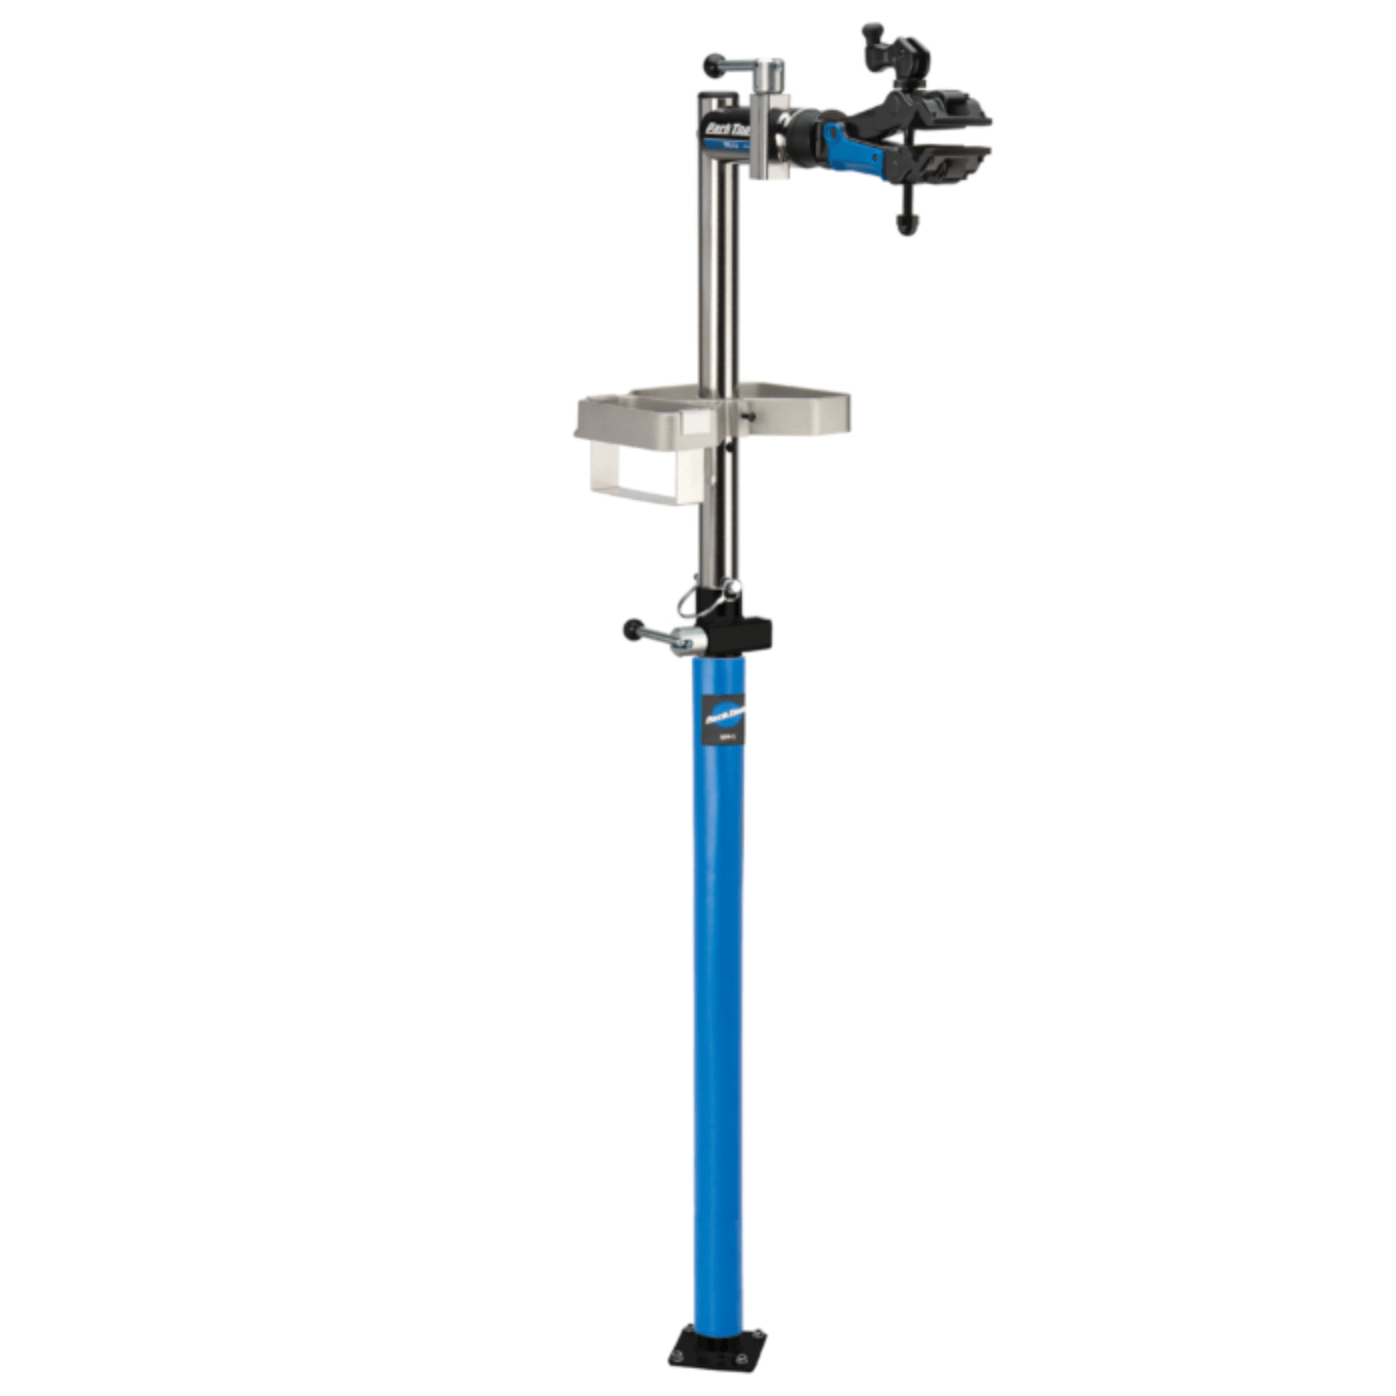 Park Tool PRS-3.3-2 Shop Repair Stand, With 100-3D clamp Repair Stands